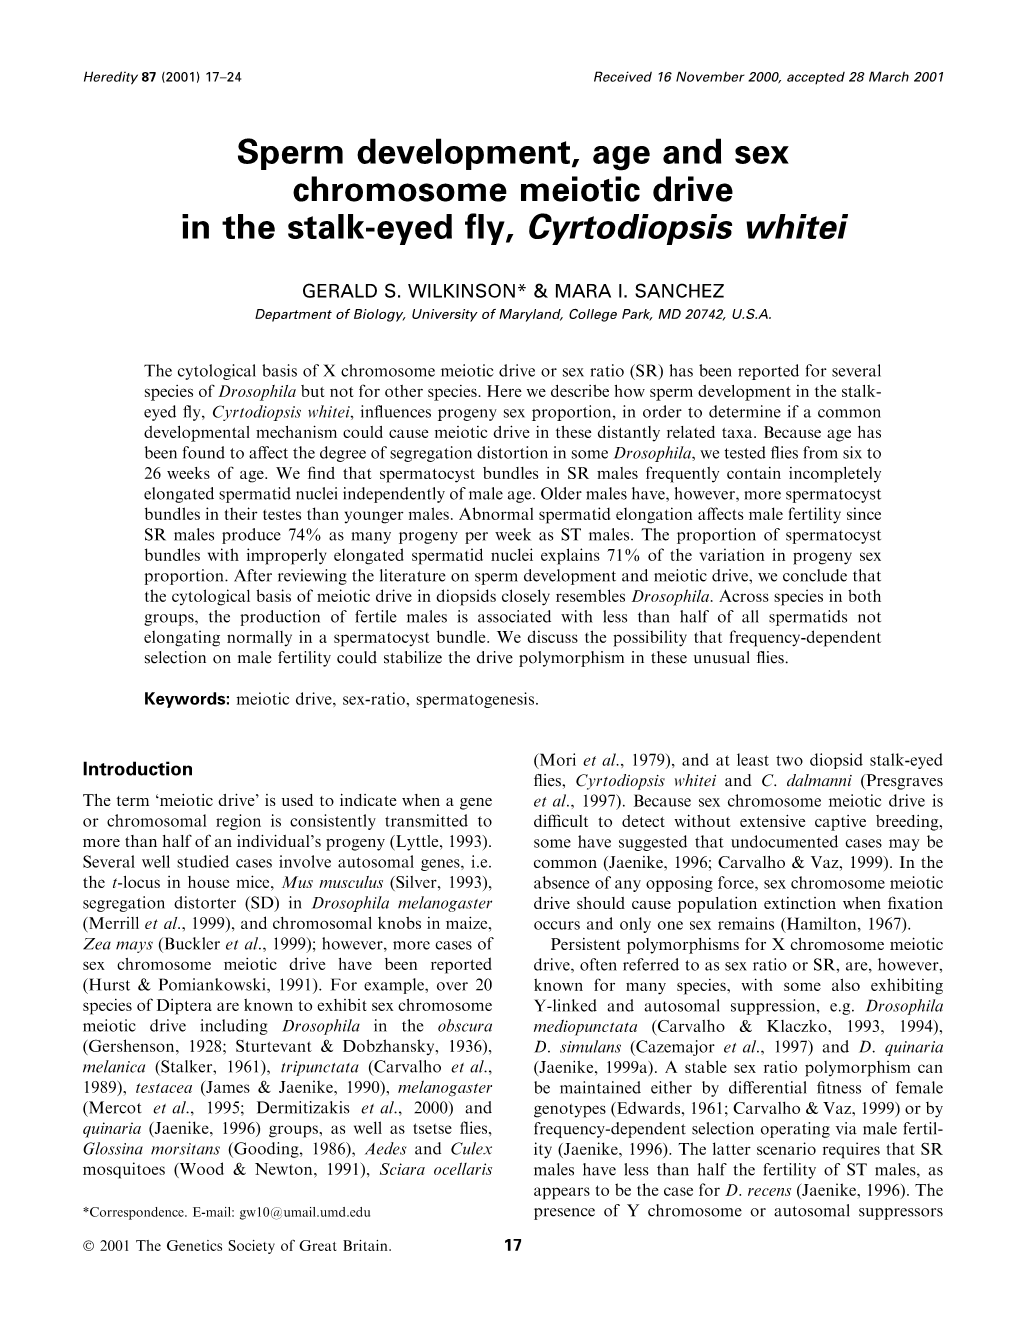 Sperm Development, Age and Sex Chromosome Meiotic Drive in the Stalk-Eyed Fly, Cyrtodiopsis Whitei